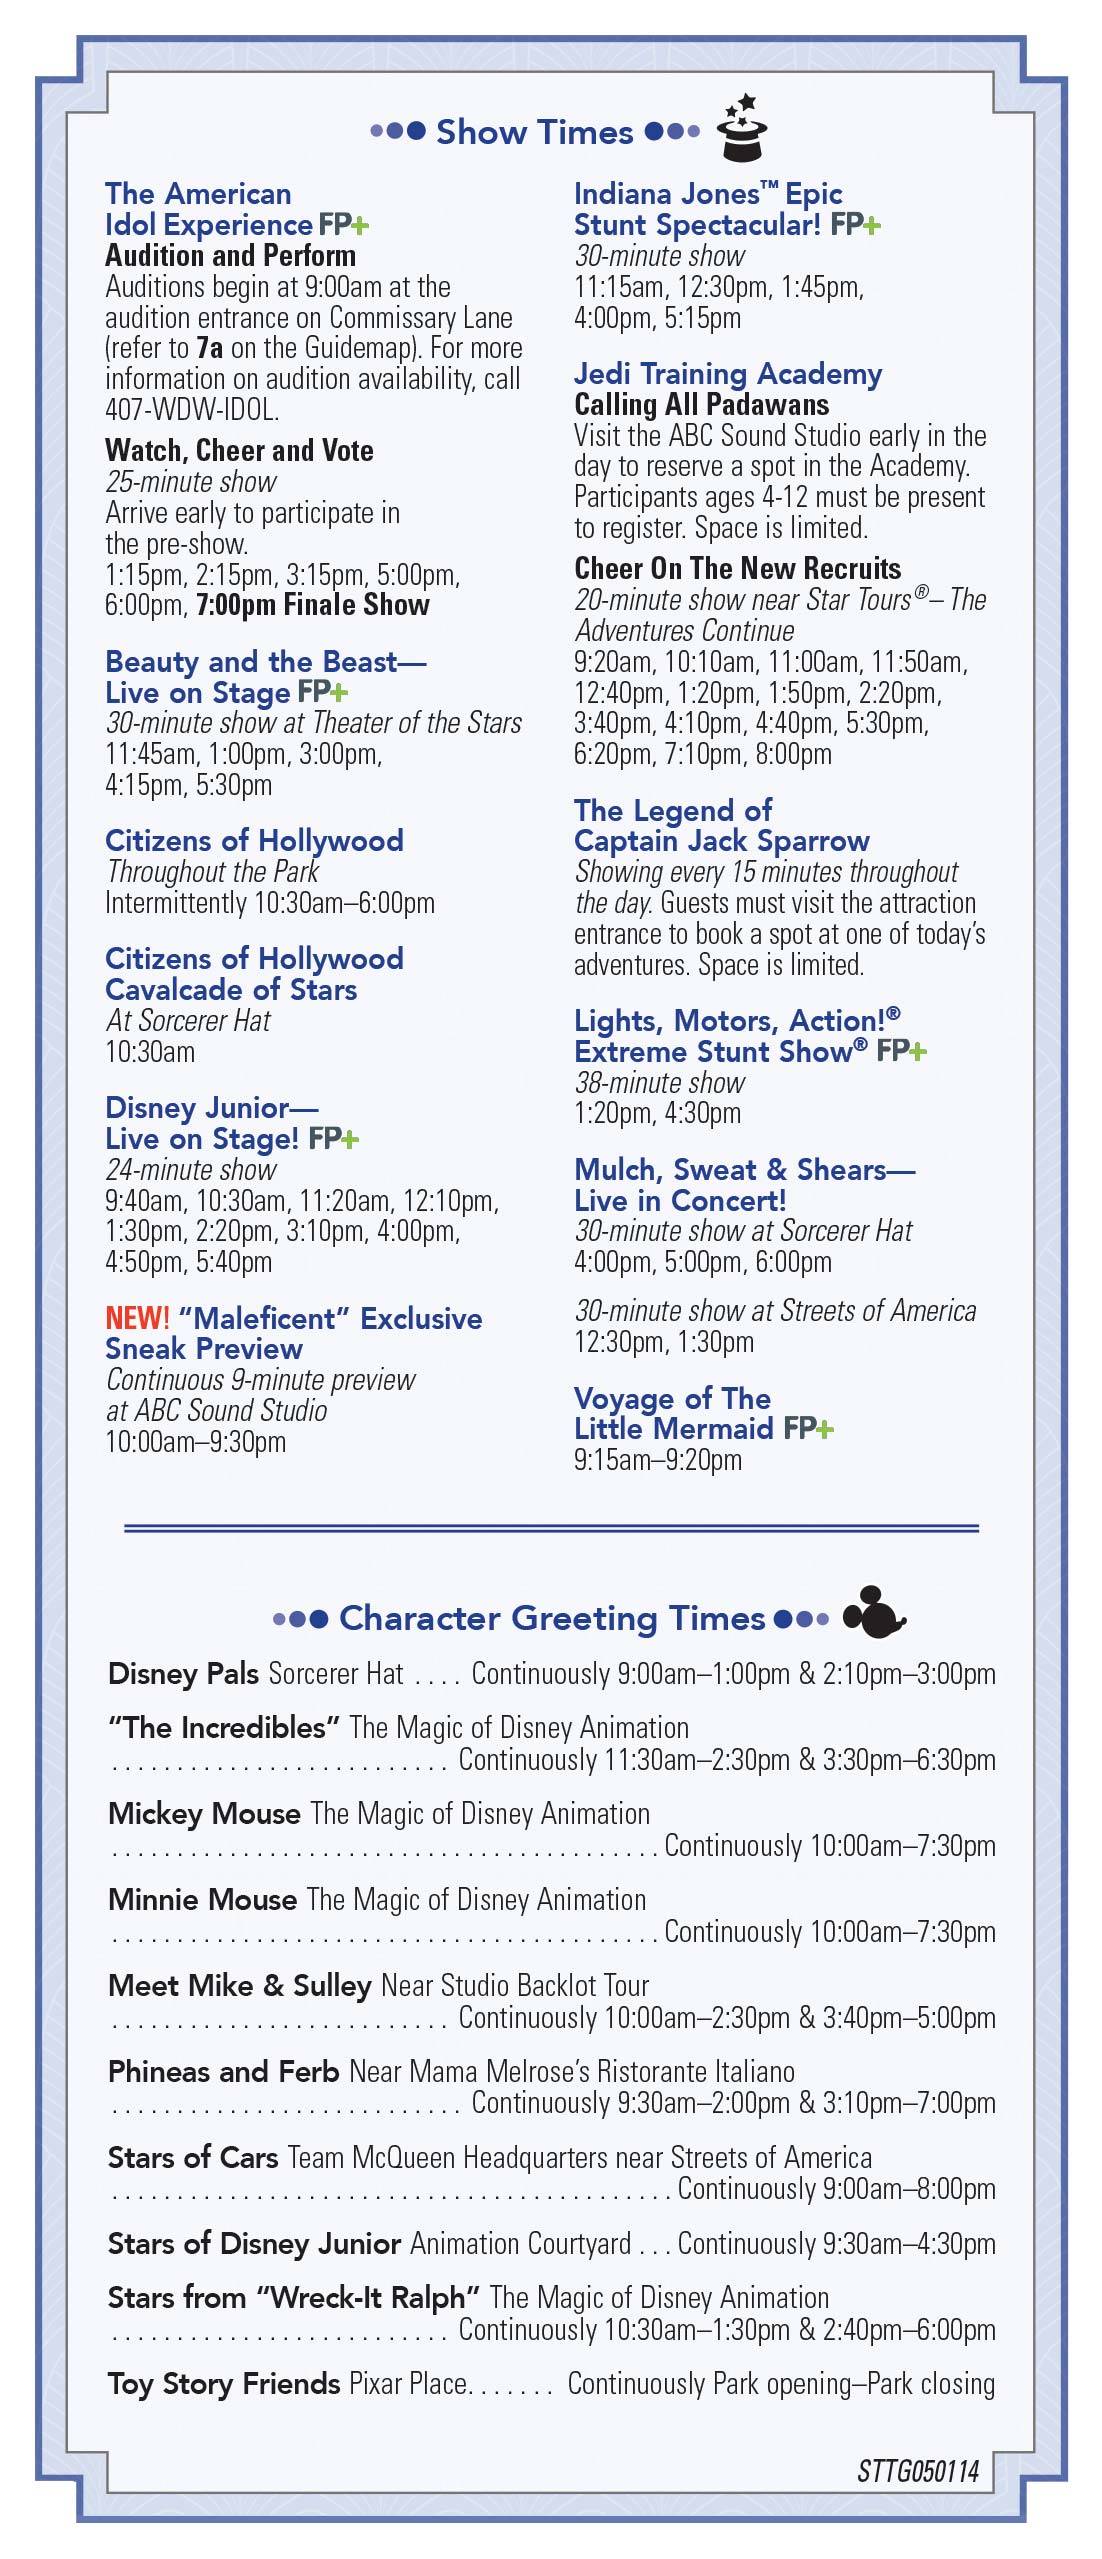 Disney's Hollywood Studios 25th Anniversary times guide